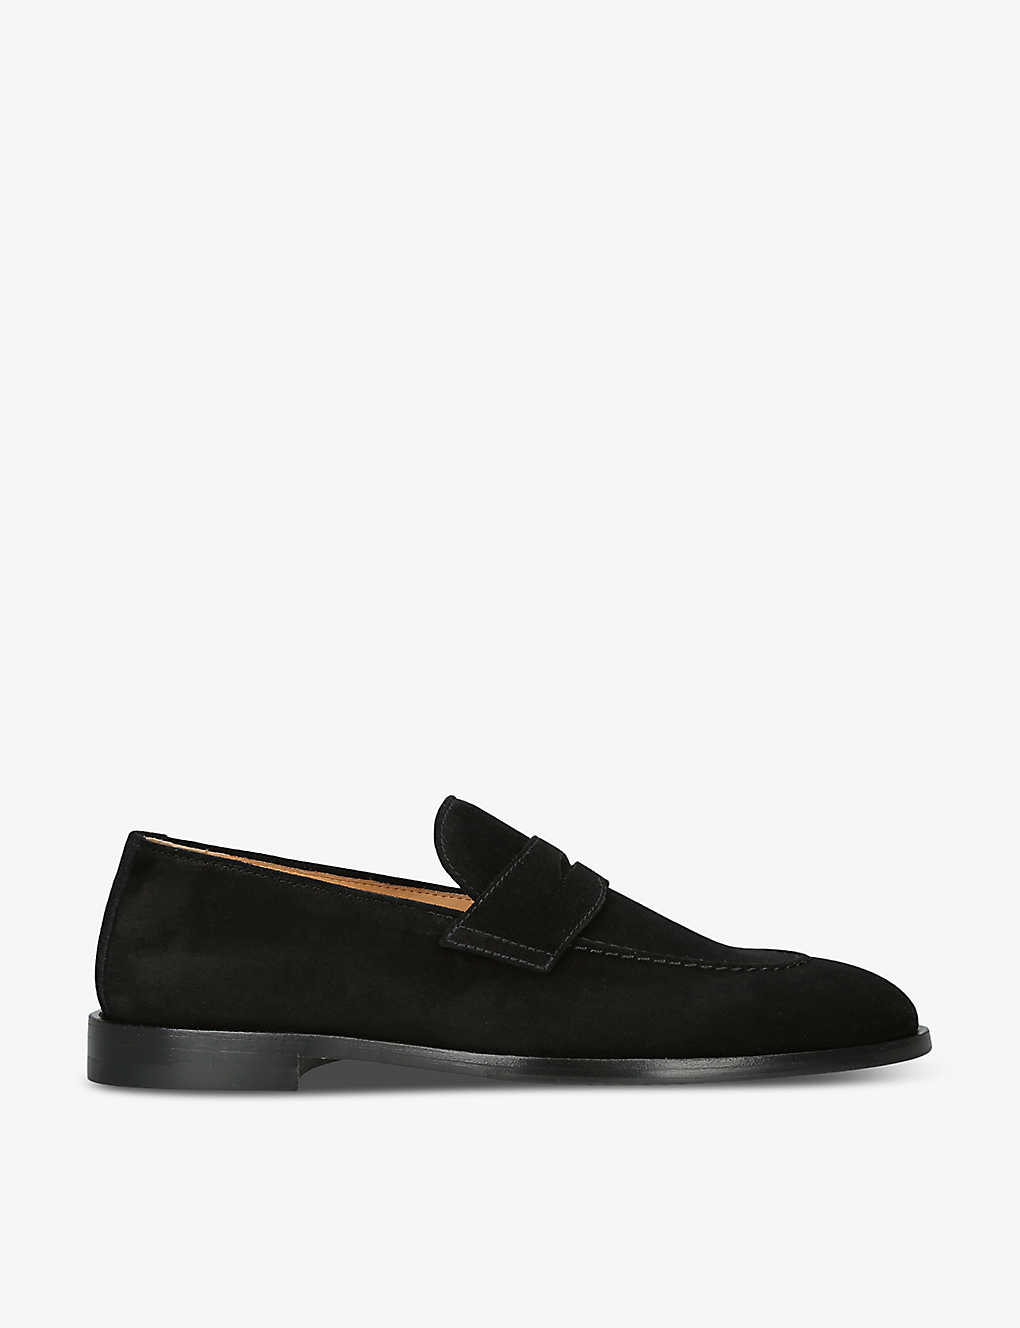 Shop Brunello Cucinelli Men's Black Classic Panelled Suede Penny Loafers